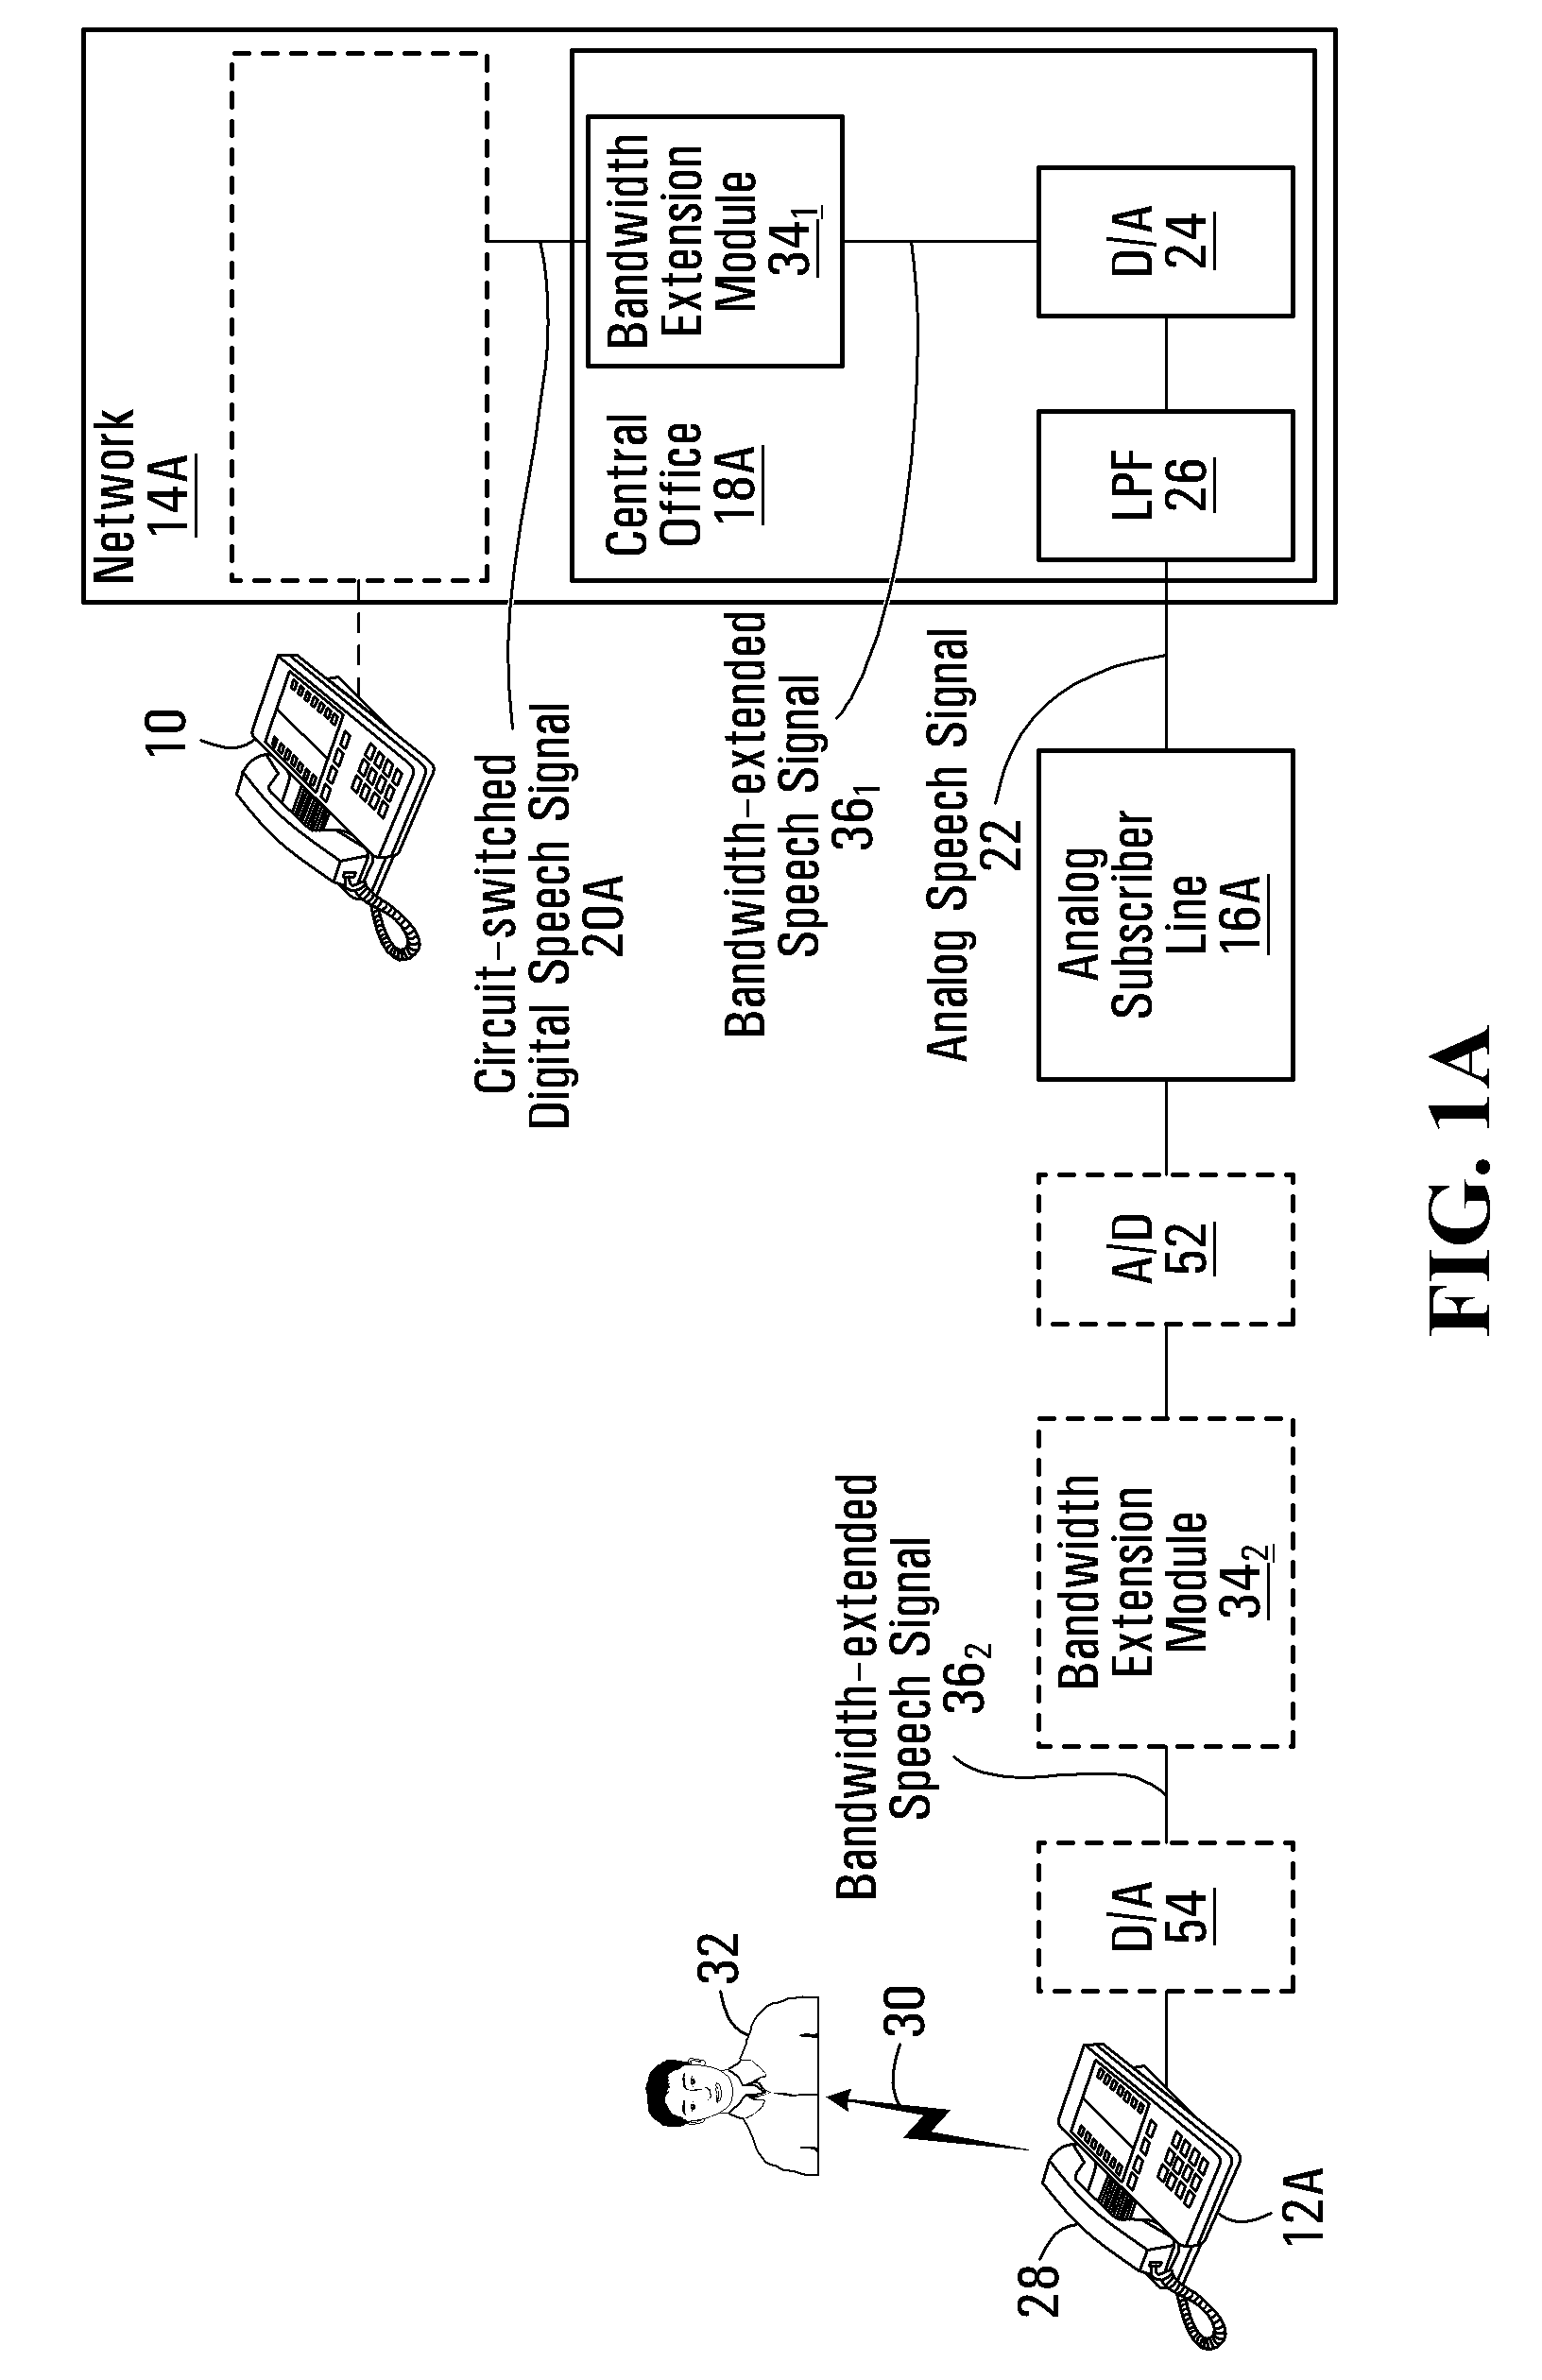 Method and apparatus for extending the bandwidth of a speech signal